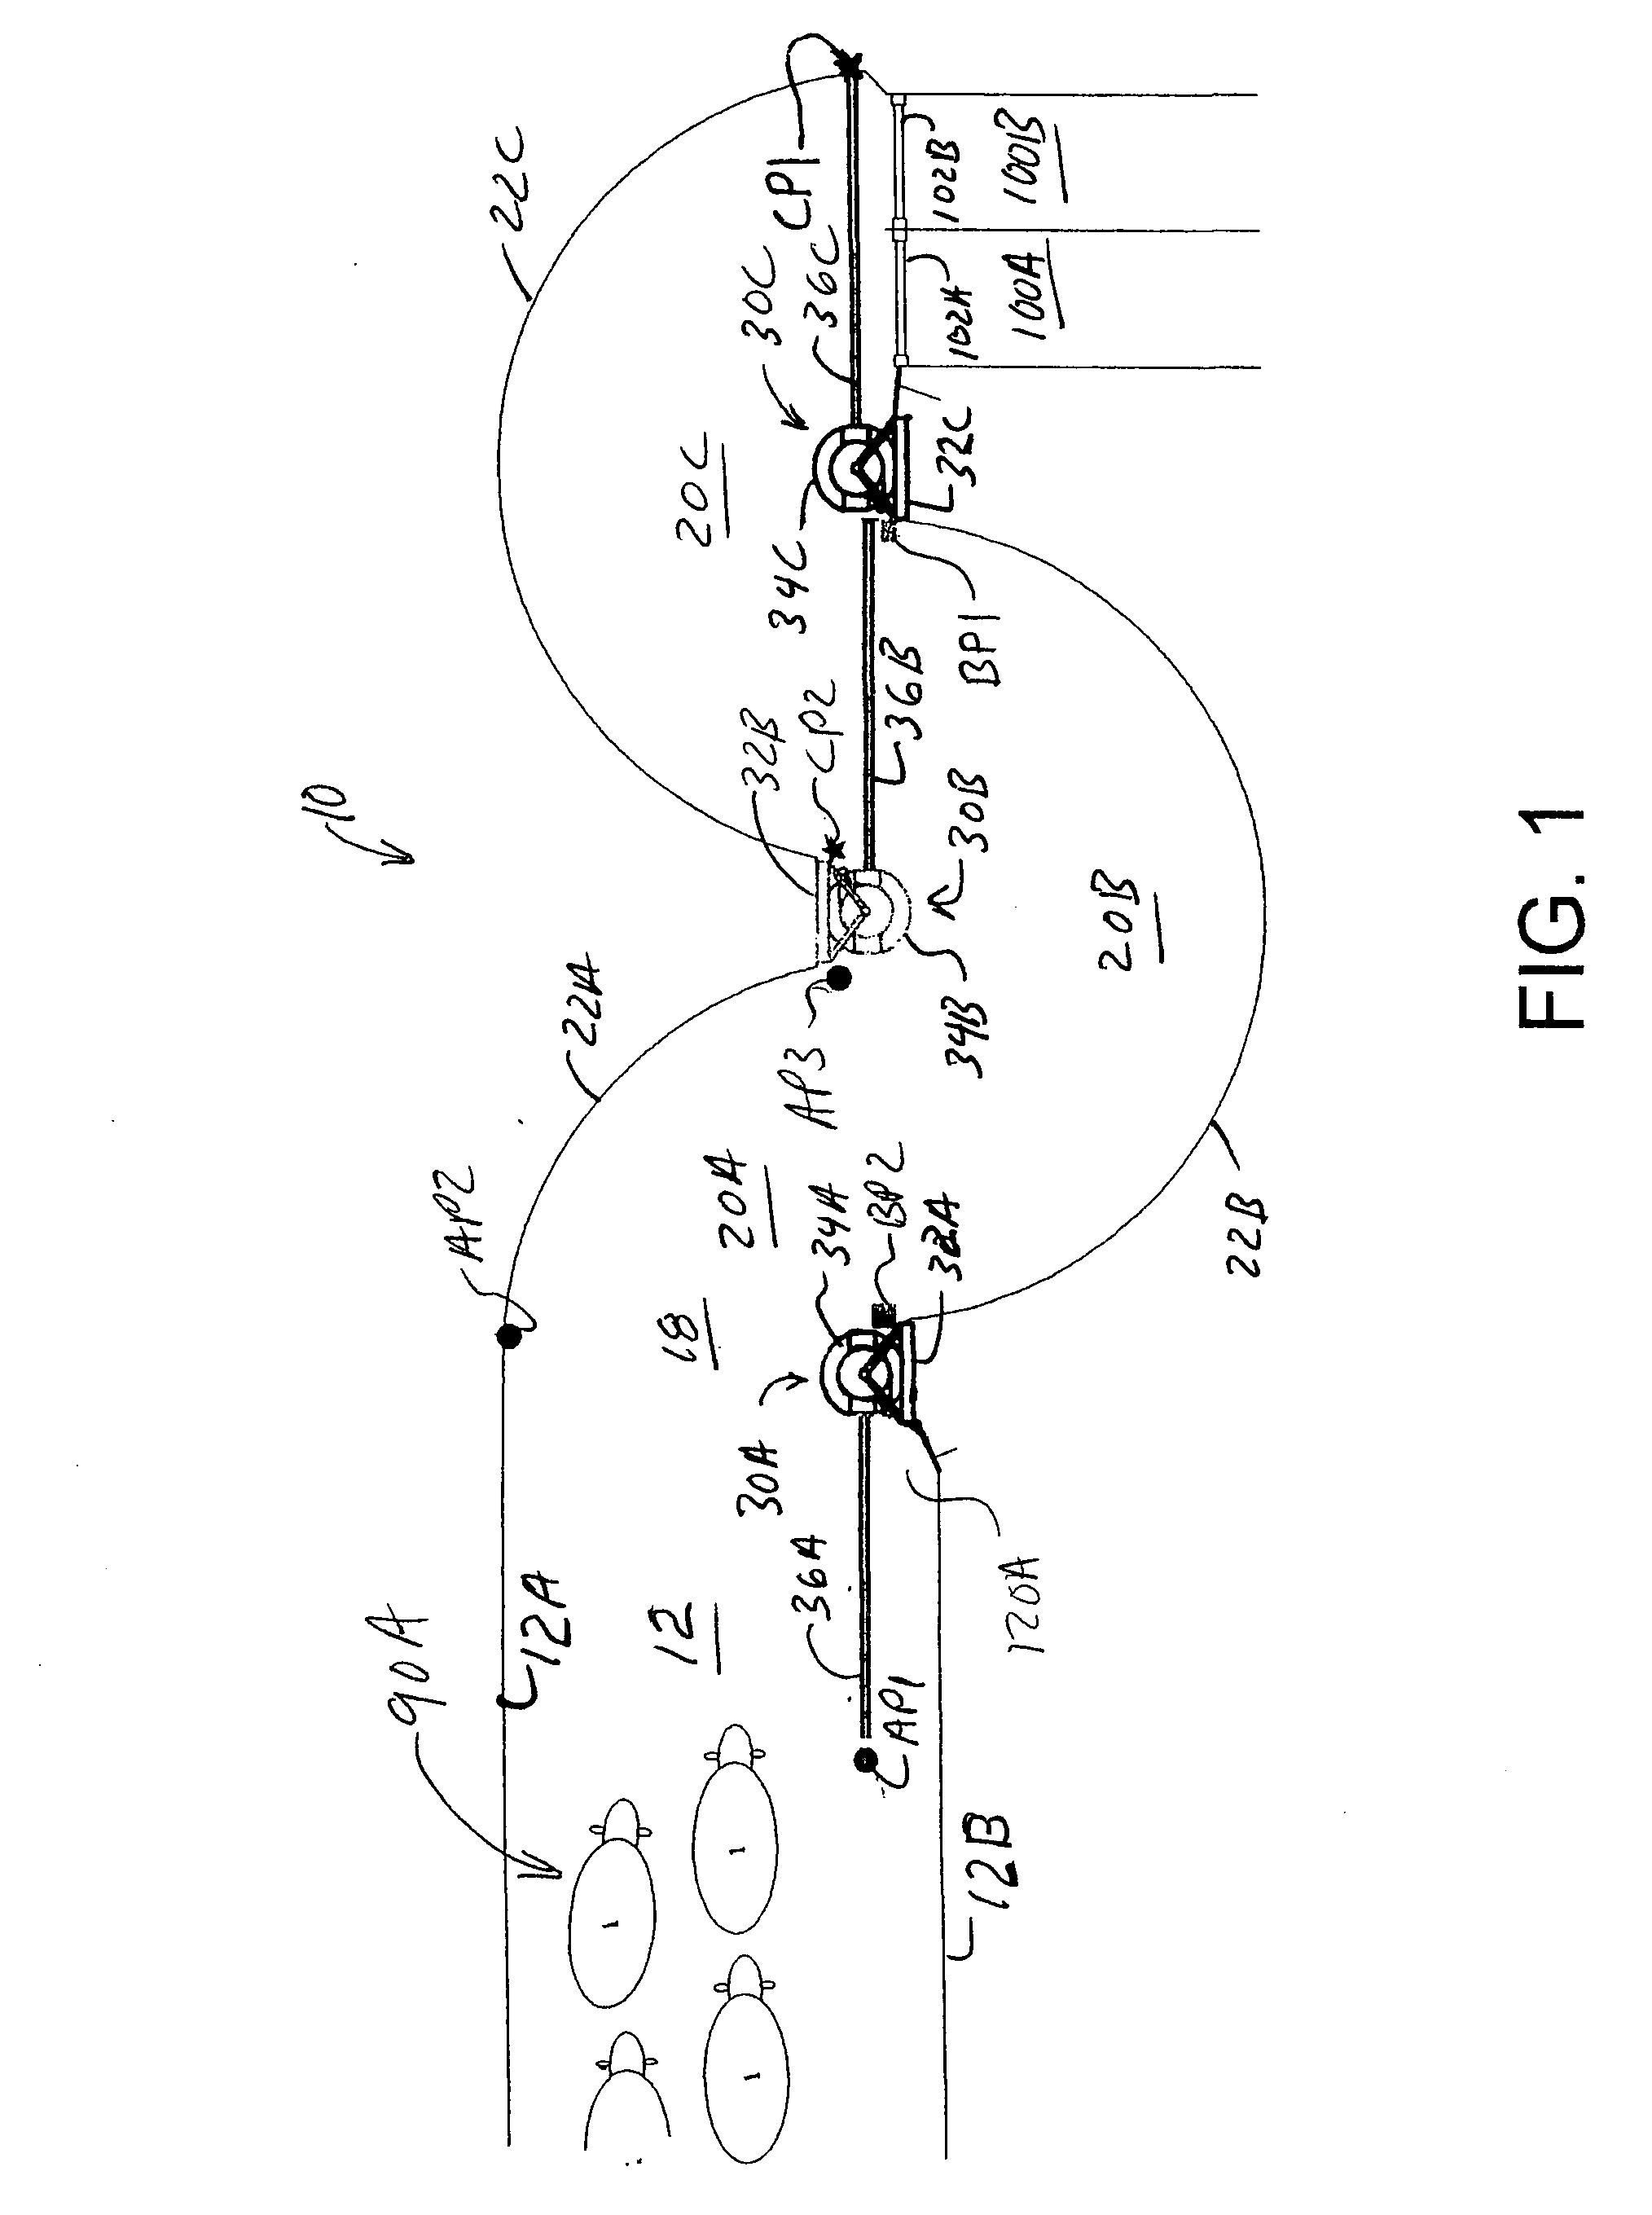 Livestock moving system and method